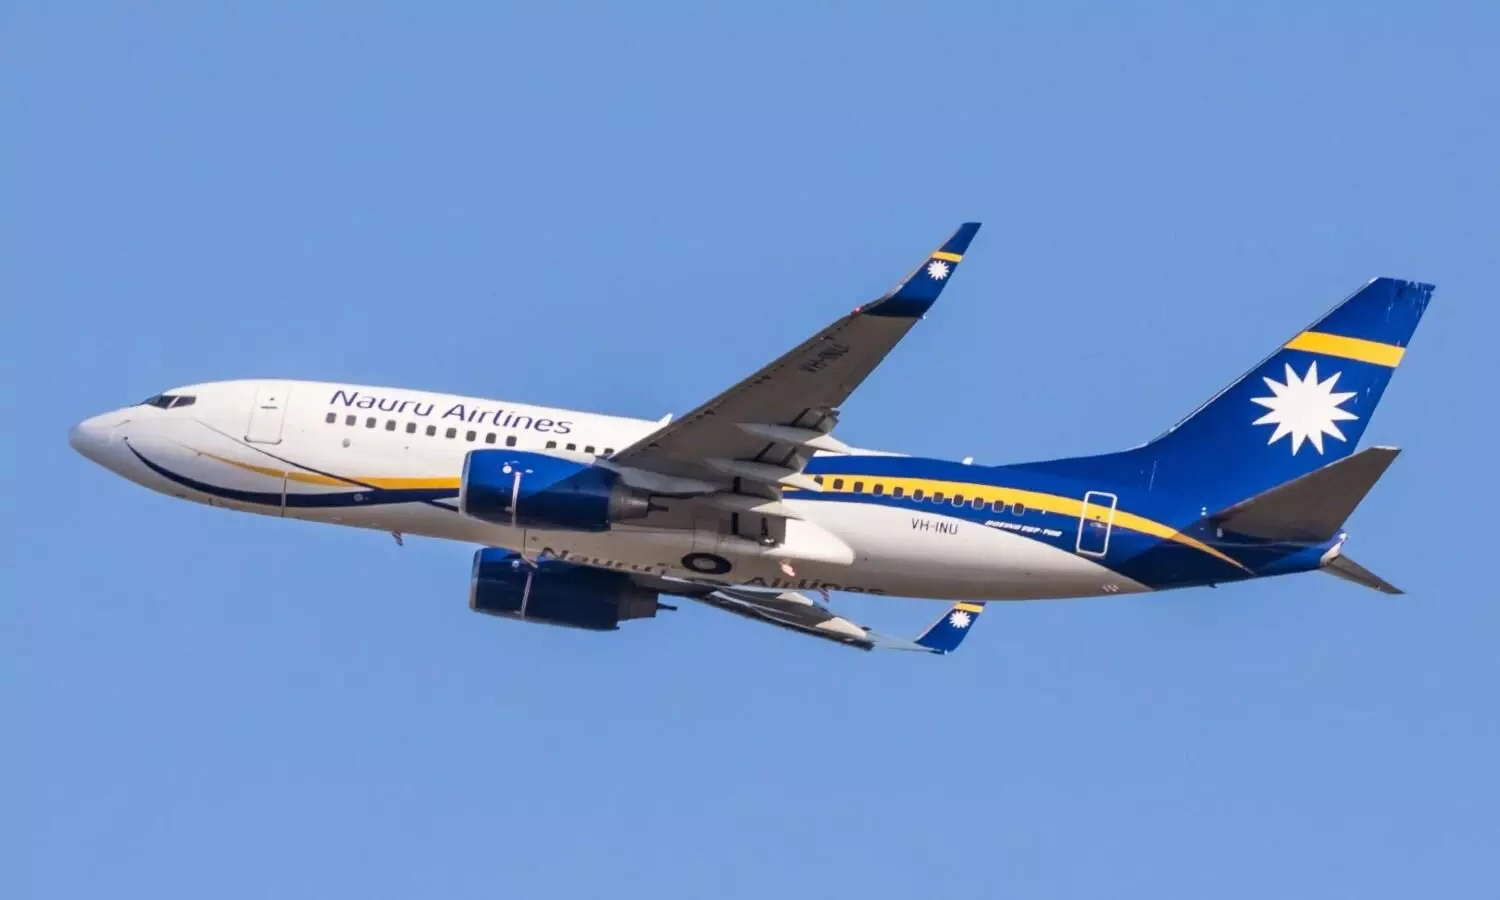 HALO concludes financing of Nauru Airlines’ 737-800SF freighter